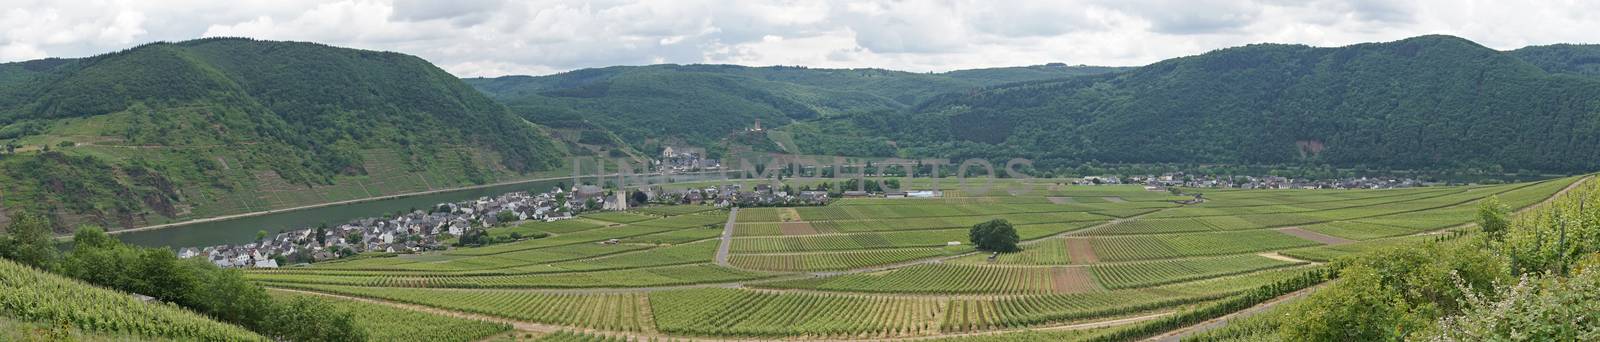 Moselle valley close to Beilstein, Germany, Europe